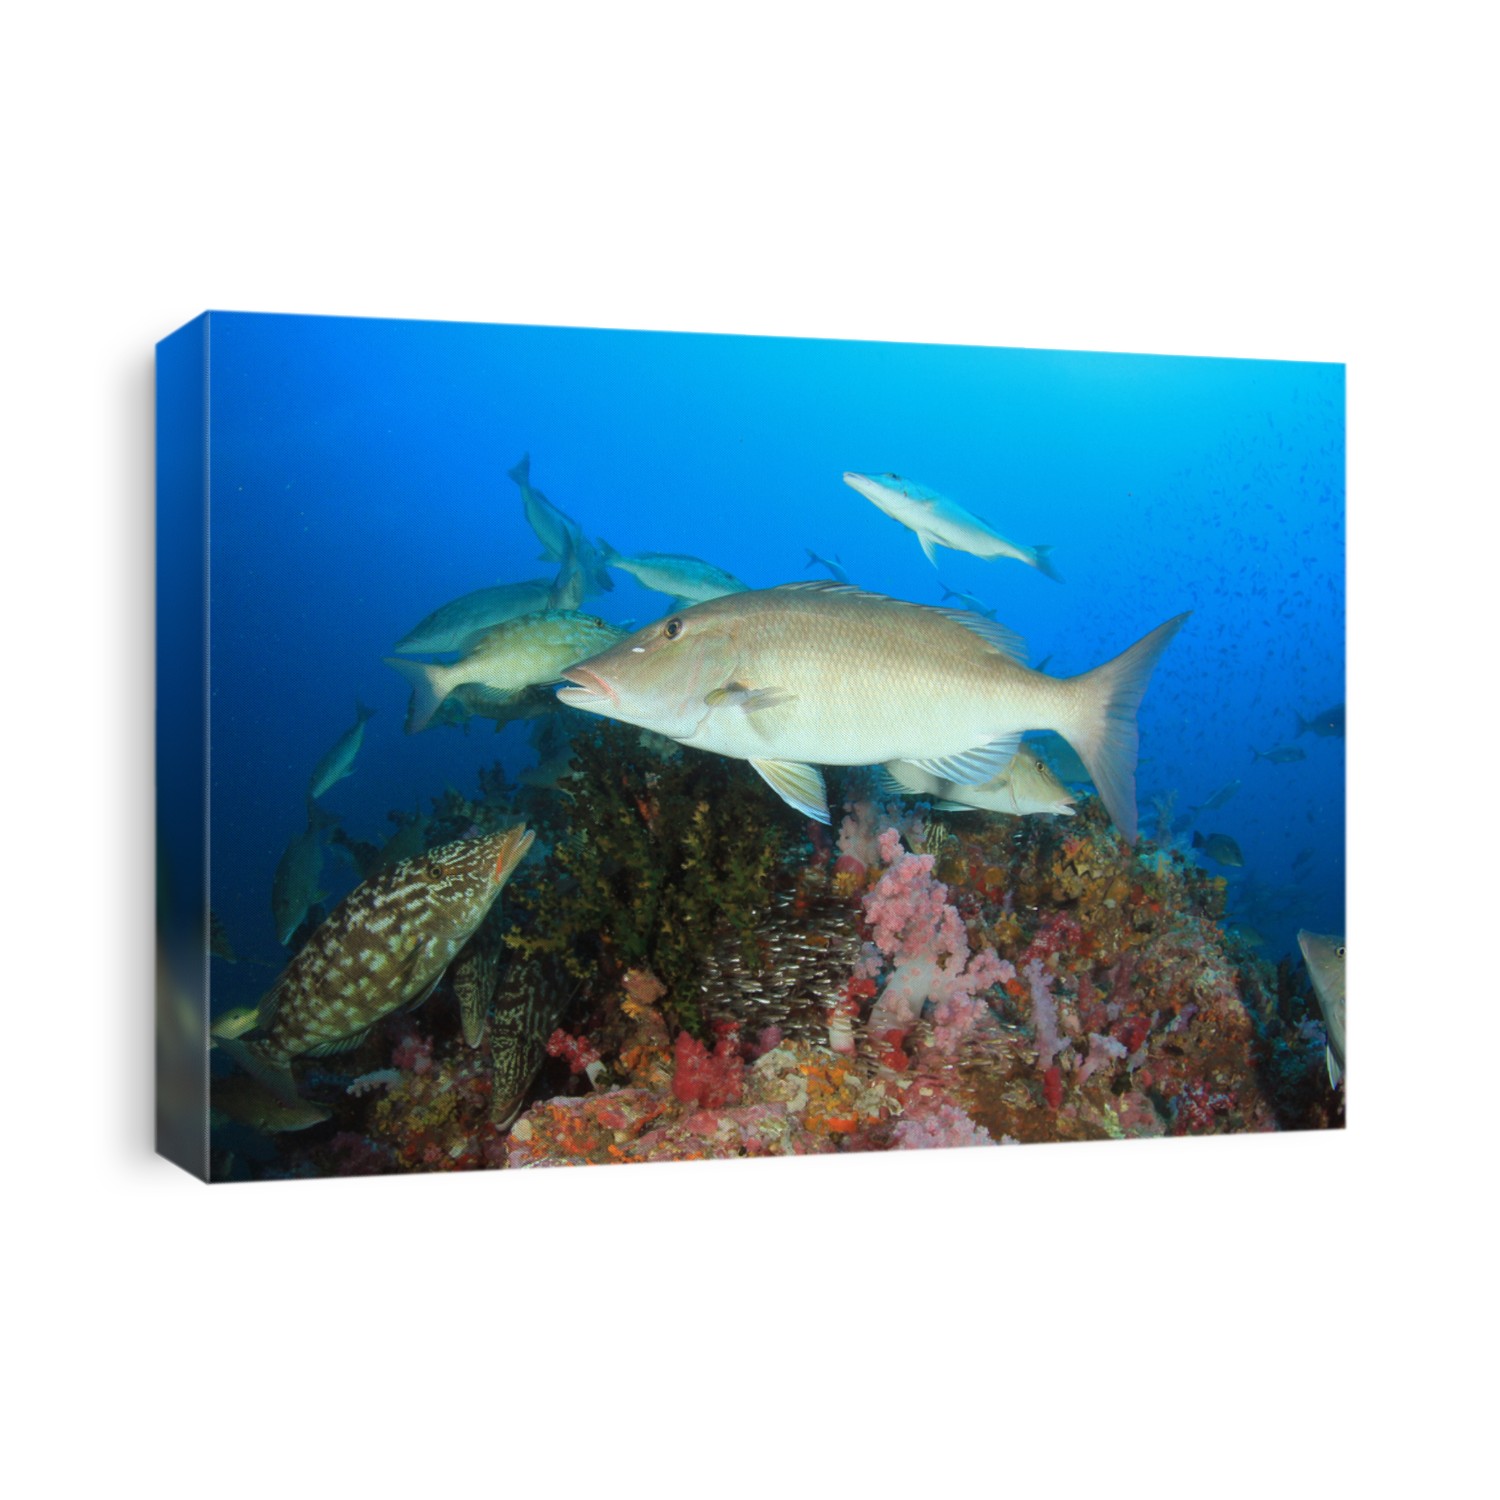 Emperor, Grouper and Snapper fish hunting on coral reef